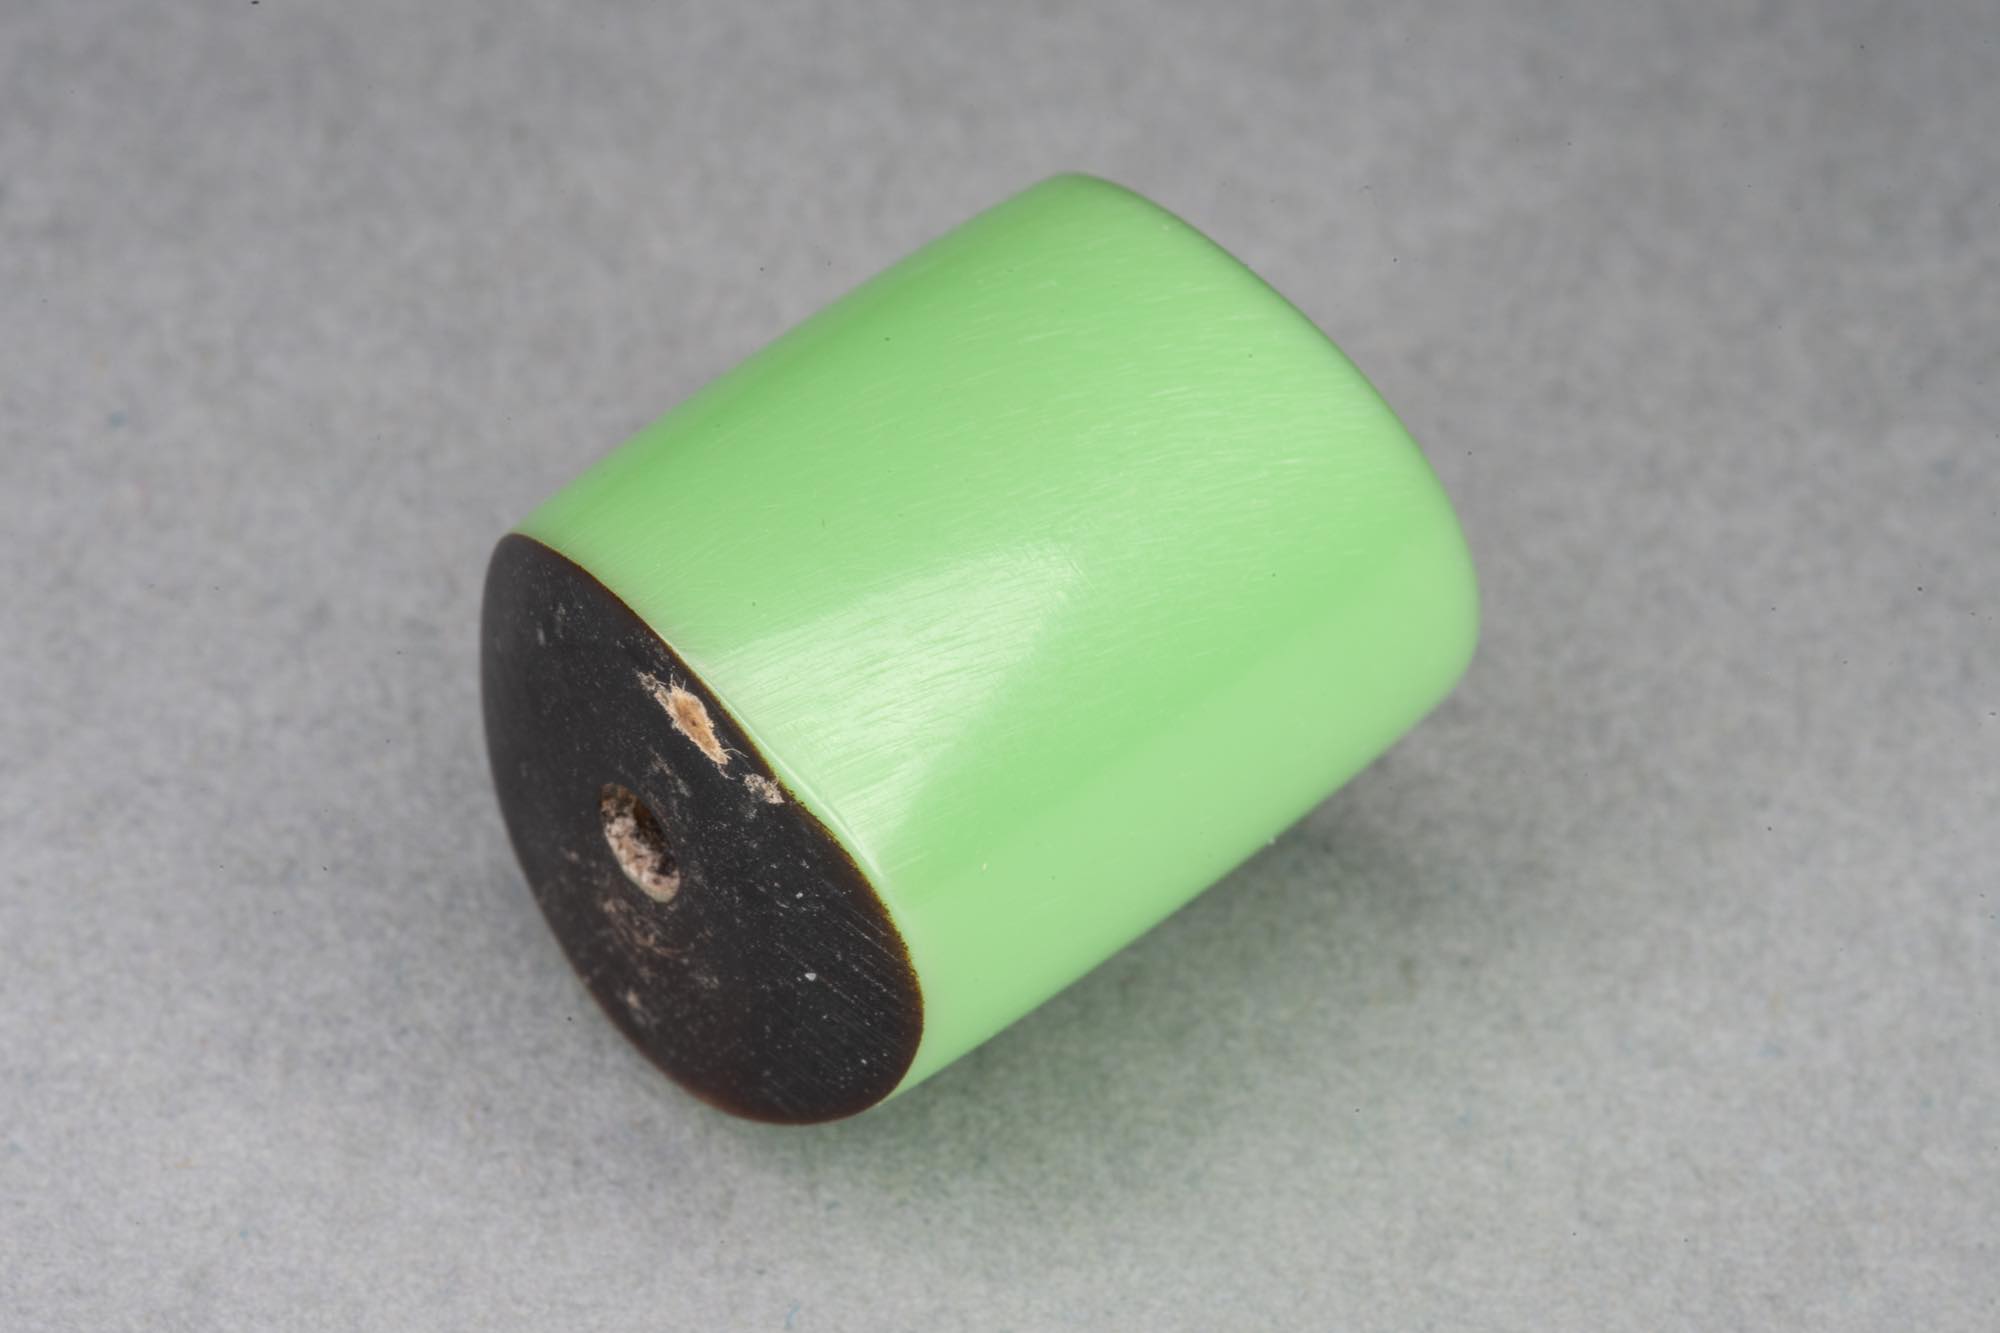 Green Barrel Resin Bead With Wavy Ends, 19x17mm, 2mm hole